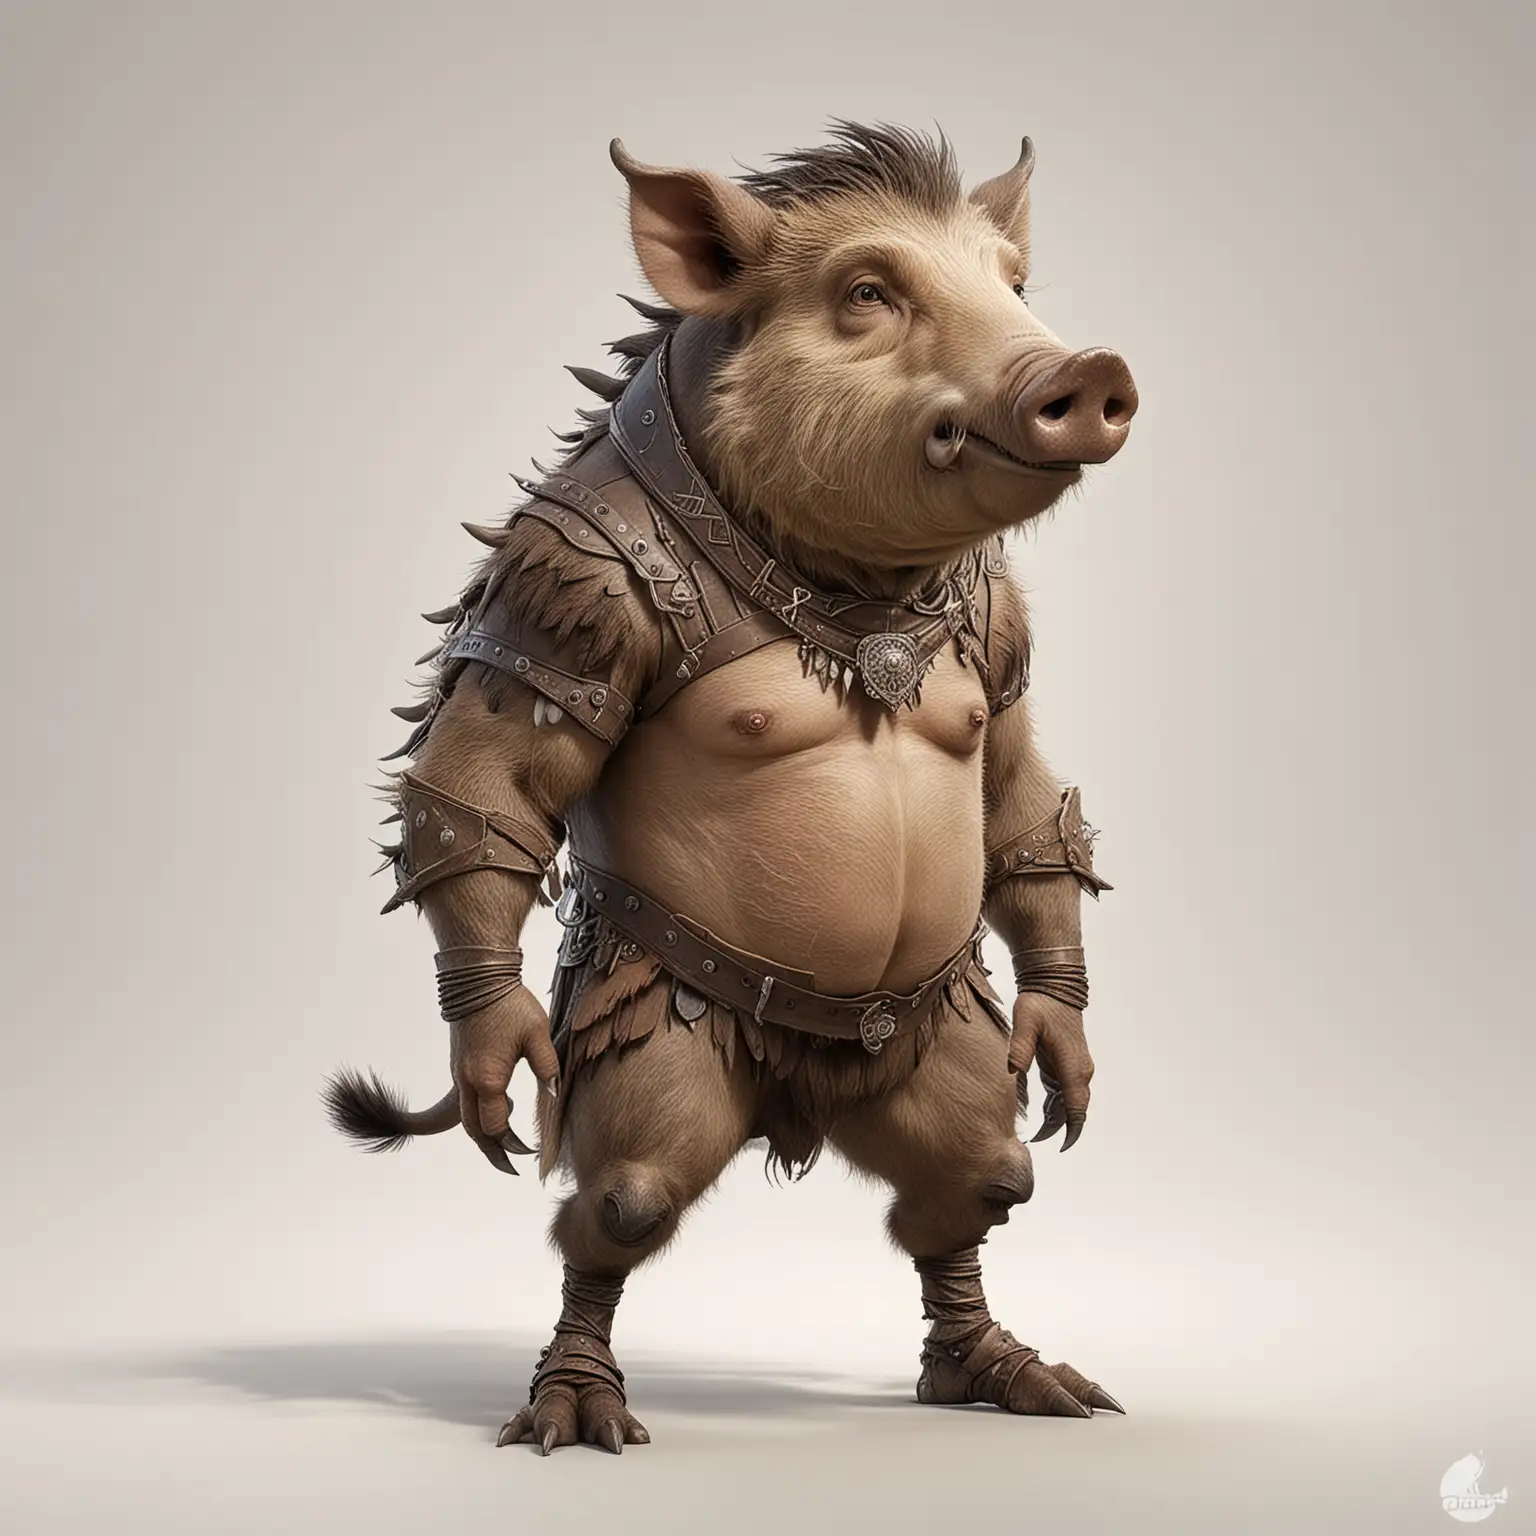 cartoon anthropomorphic boar in the style of Zveropolis, concept art, line art, white background, the boar should stand upright on its hind legs, in a natural pose similar to a human, with front legs / hooves on the sides.